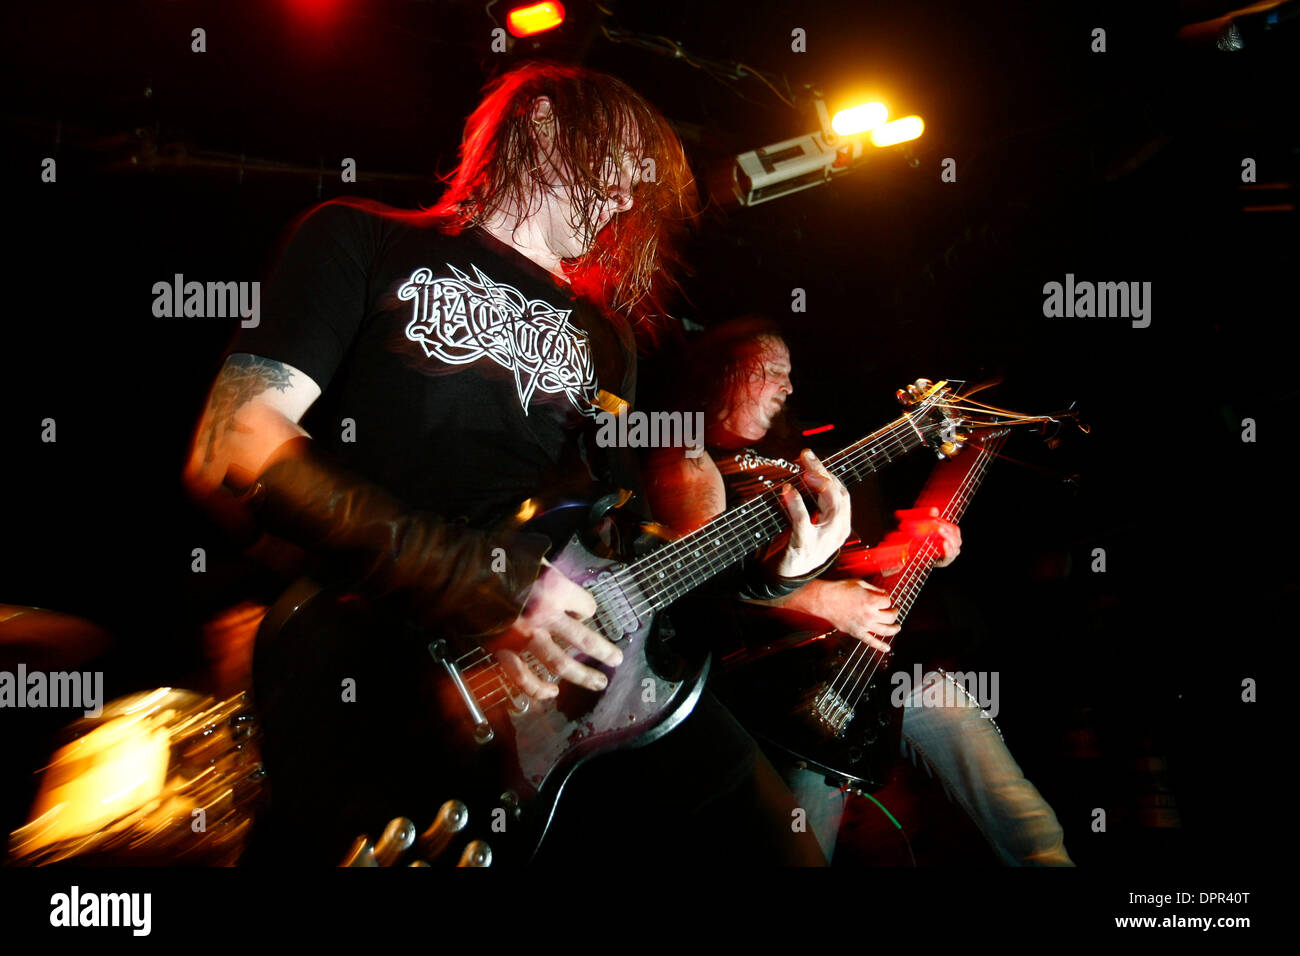 Dec 07, 2008 - Brooklyn , New York, USA - Nachtmystium performing at Public Assembly in Williamsburg. BLAKE JUDD, left, guitar and lead vocals and JON NECROMANCER playing the bass and singing backing vocals.  (Credit Image: © Aviv Small/ZUMA Press) Stock Photo